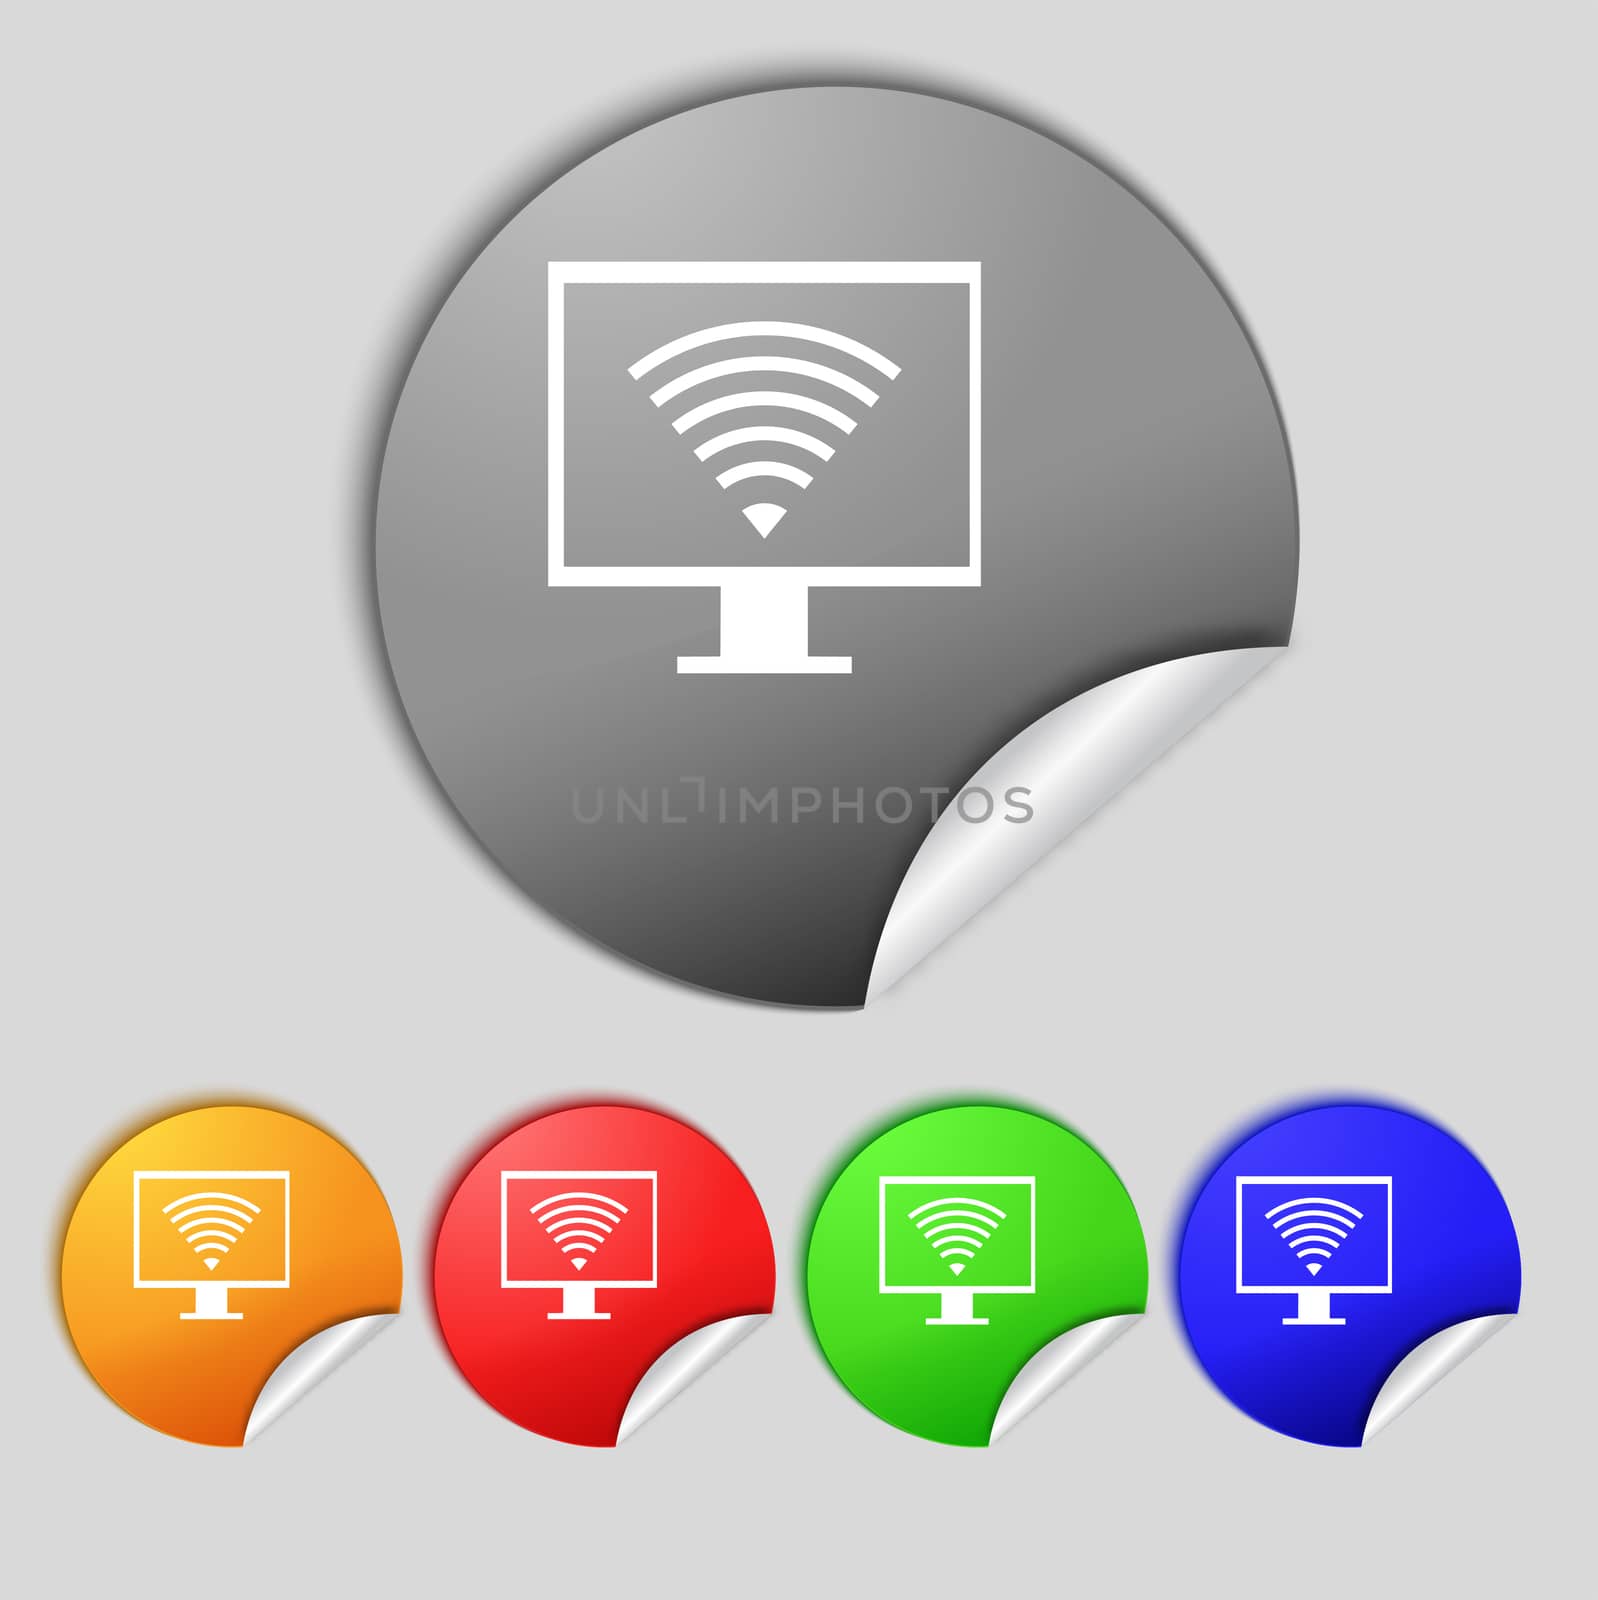 wi fi and monitor sign icon. Video game symbol. Set colourful buttons. illustration